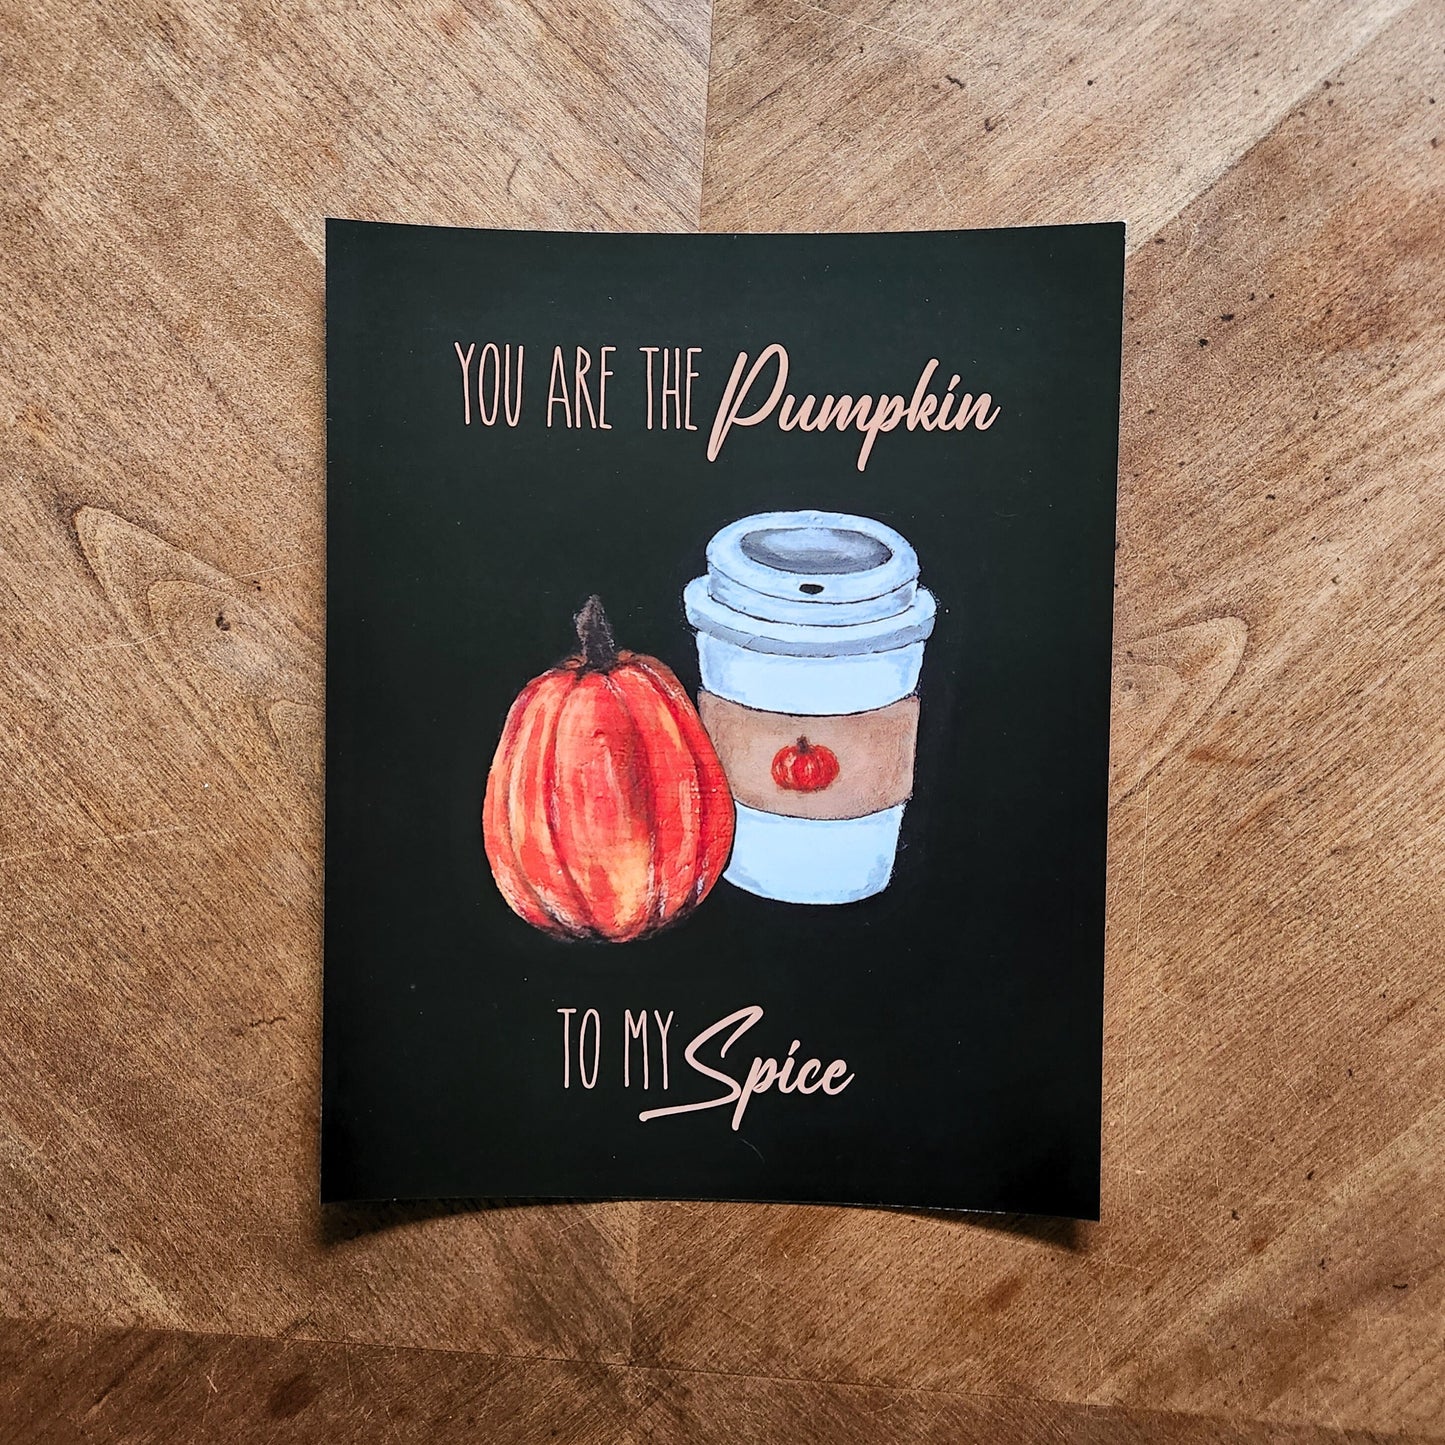 You are the pumpkin to my spice, Cute pumpkin spice anniversary card, Halloween spooky season latte love card for wife, Husband, Partner